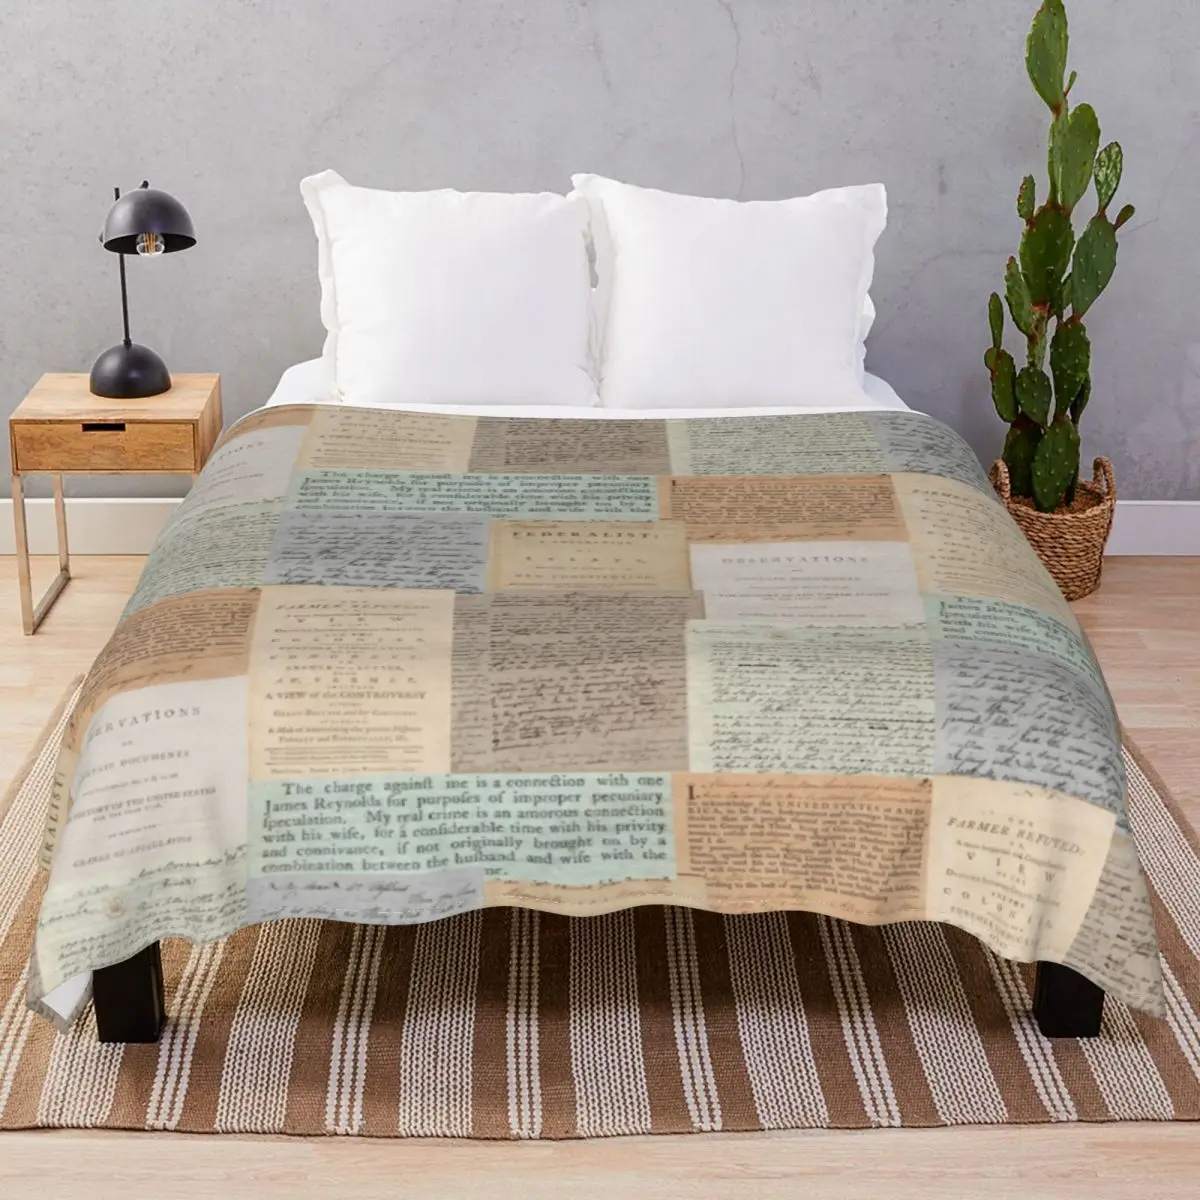 Hamilton Papers Collection Blankets Flannel Printed Ultra-Soft Throw Blanket for Bedding Sofa Camp Cinema